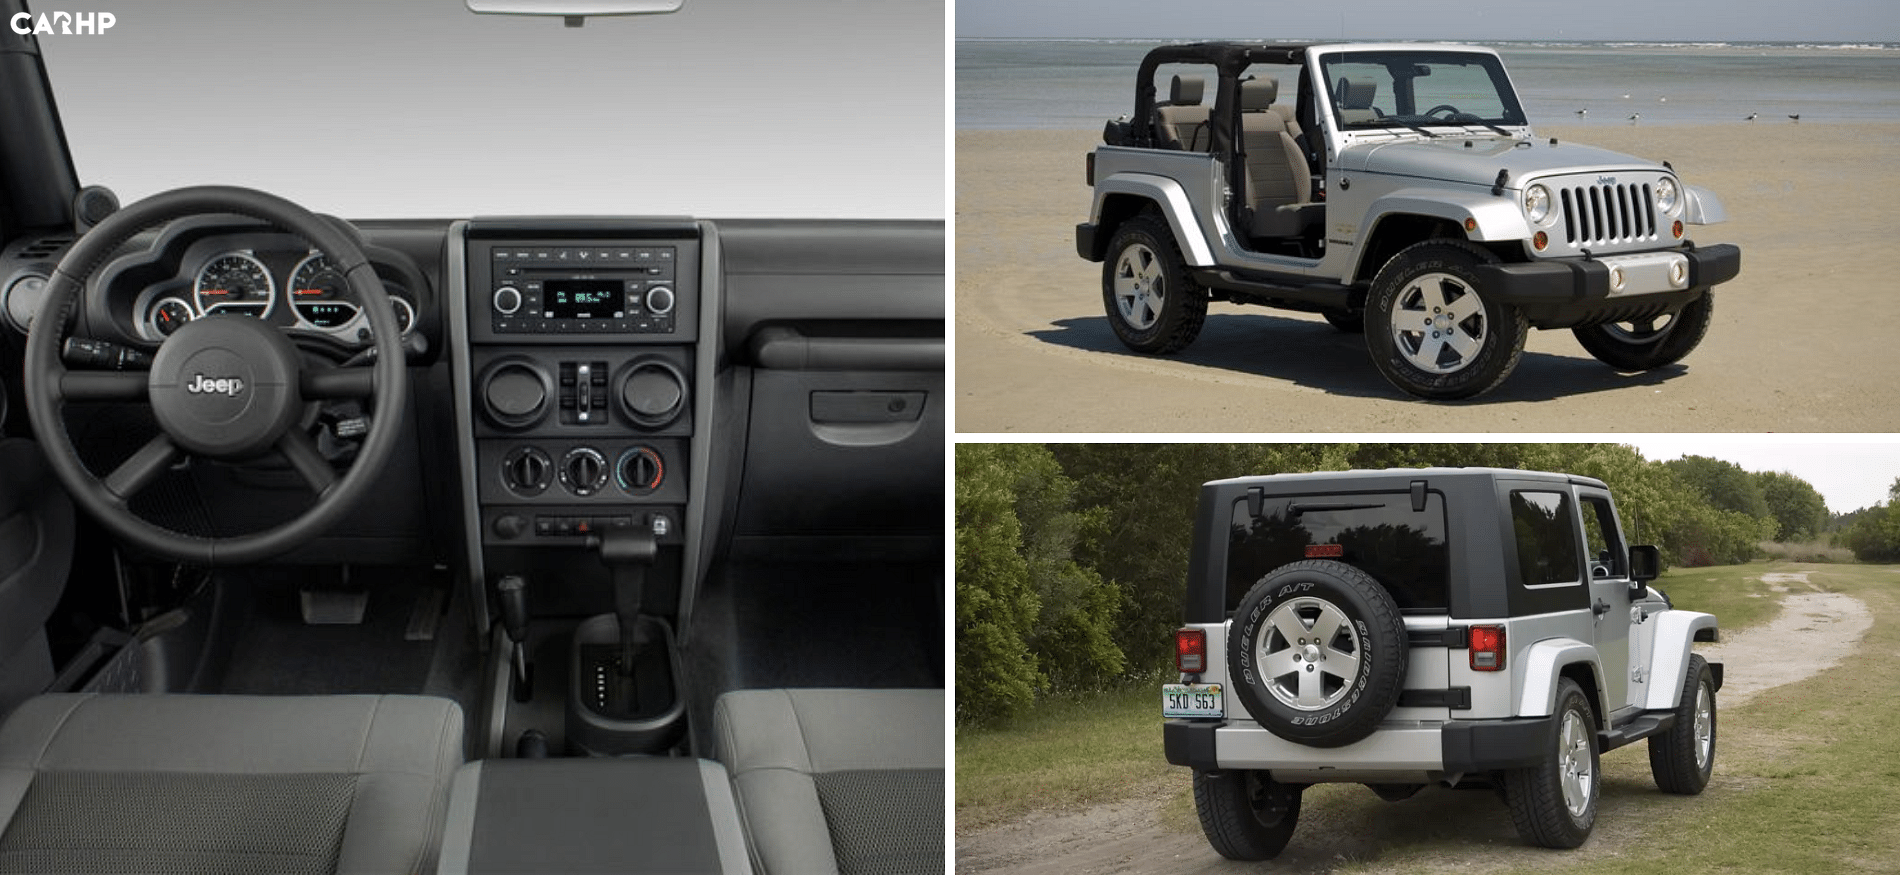 Take A Look At The Worst Jeep Wranglers Ever